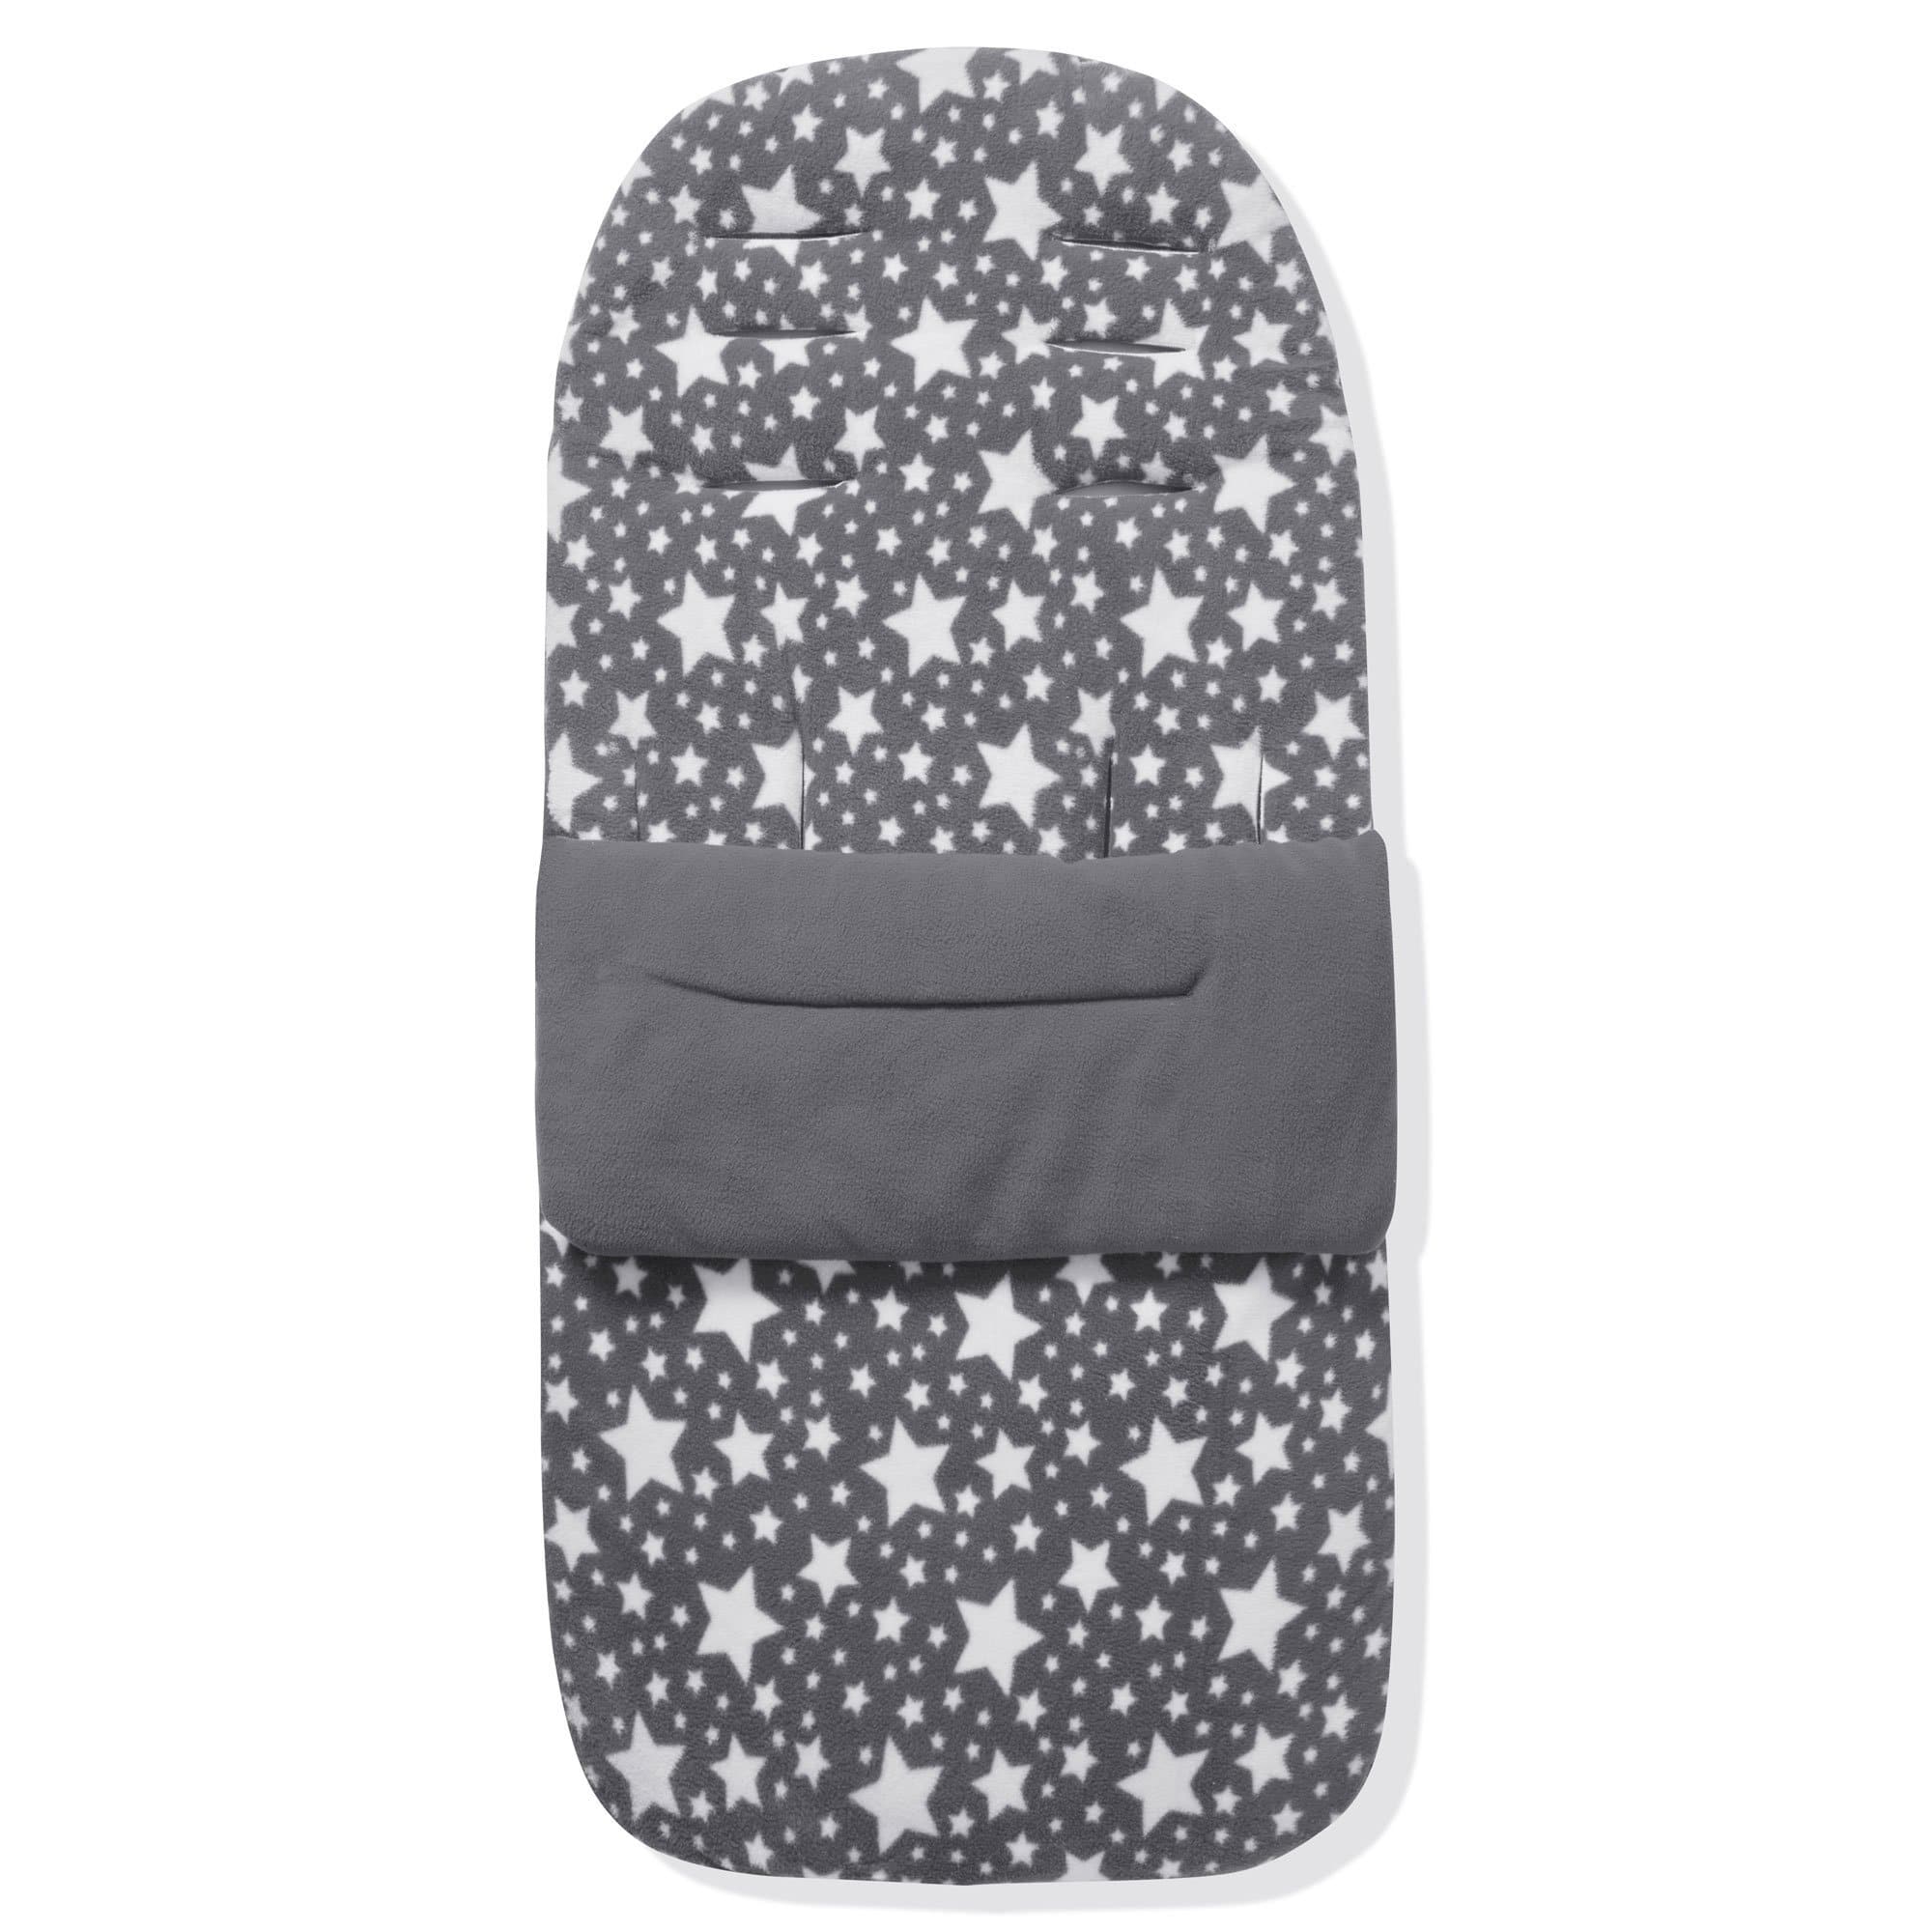 Fleece Footmuff / Cosy Toes Compatible with Hesba - For Your Little One